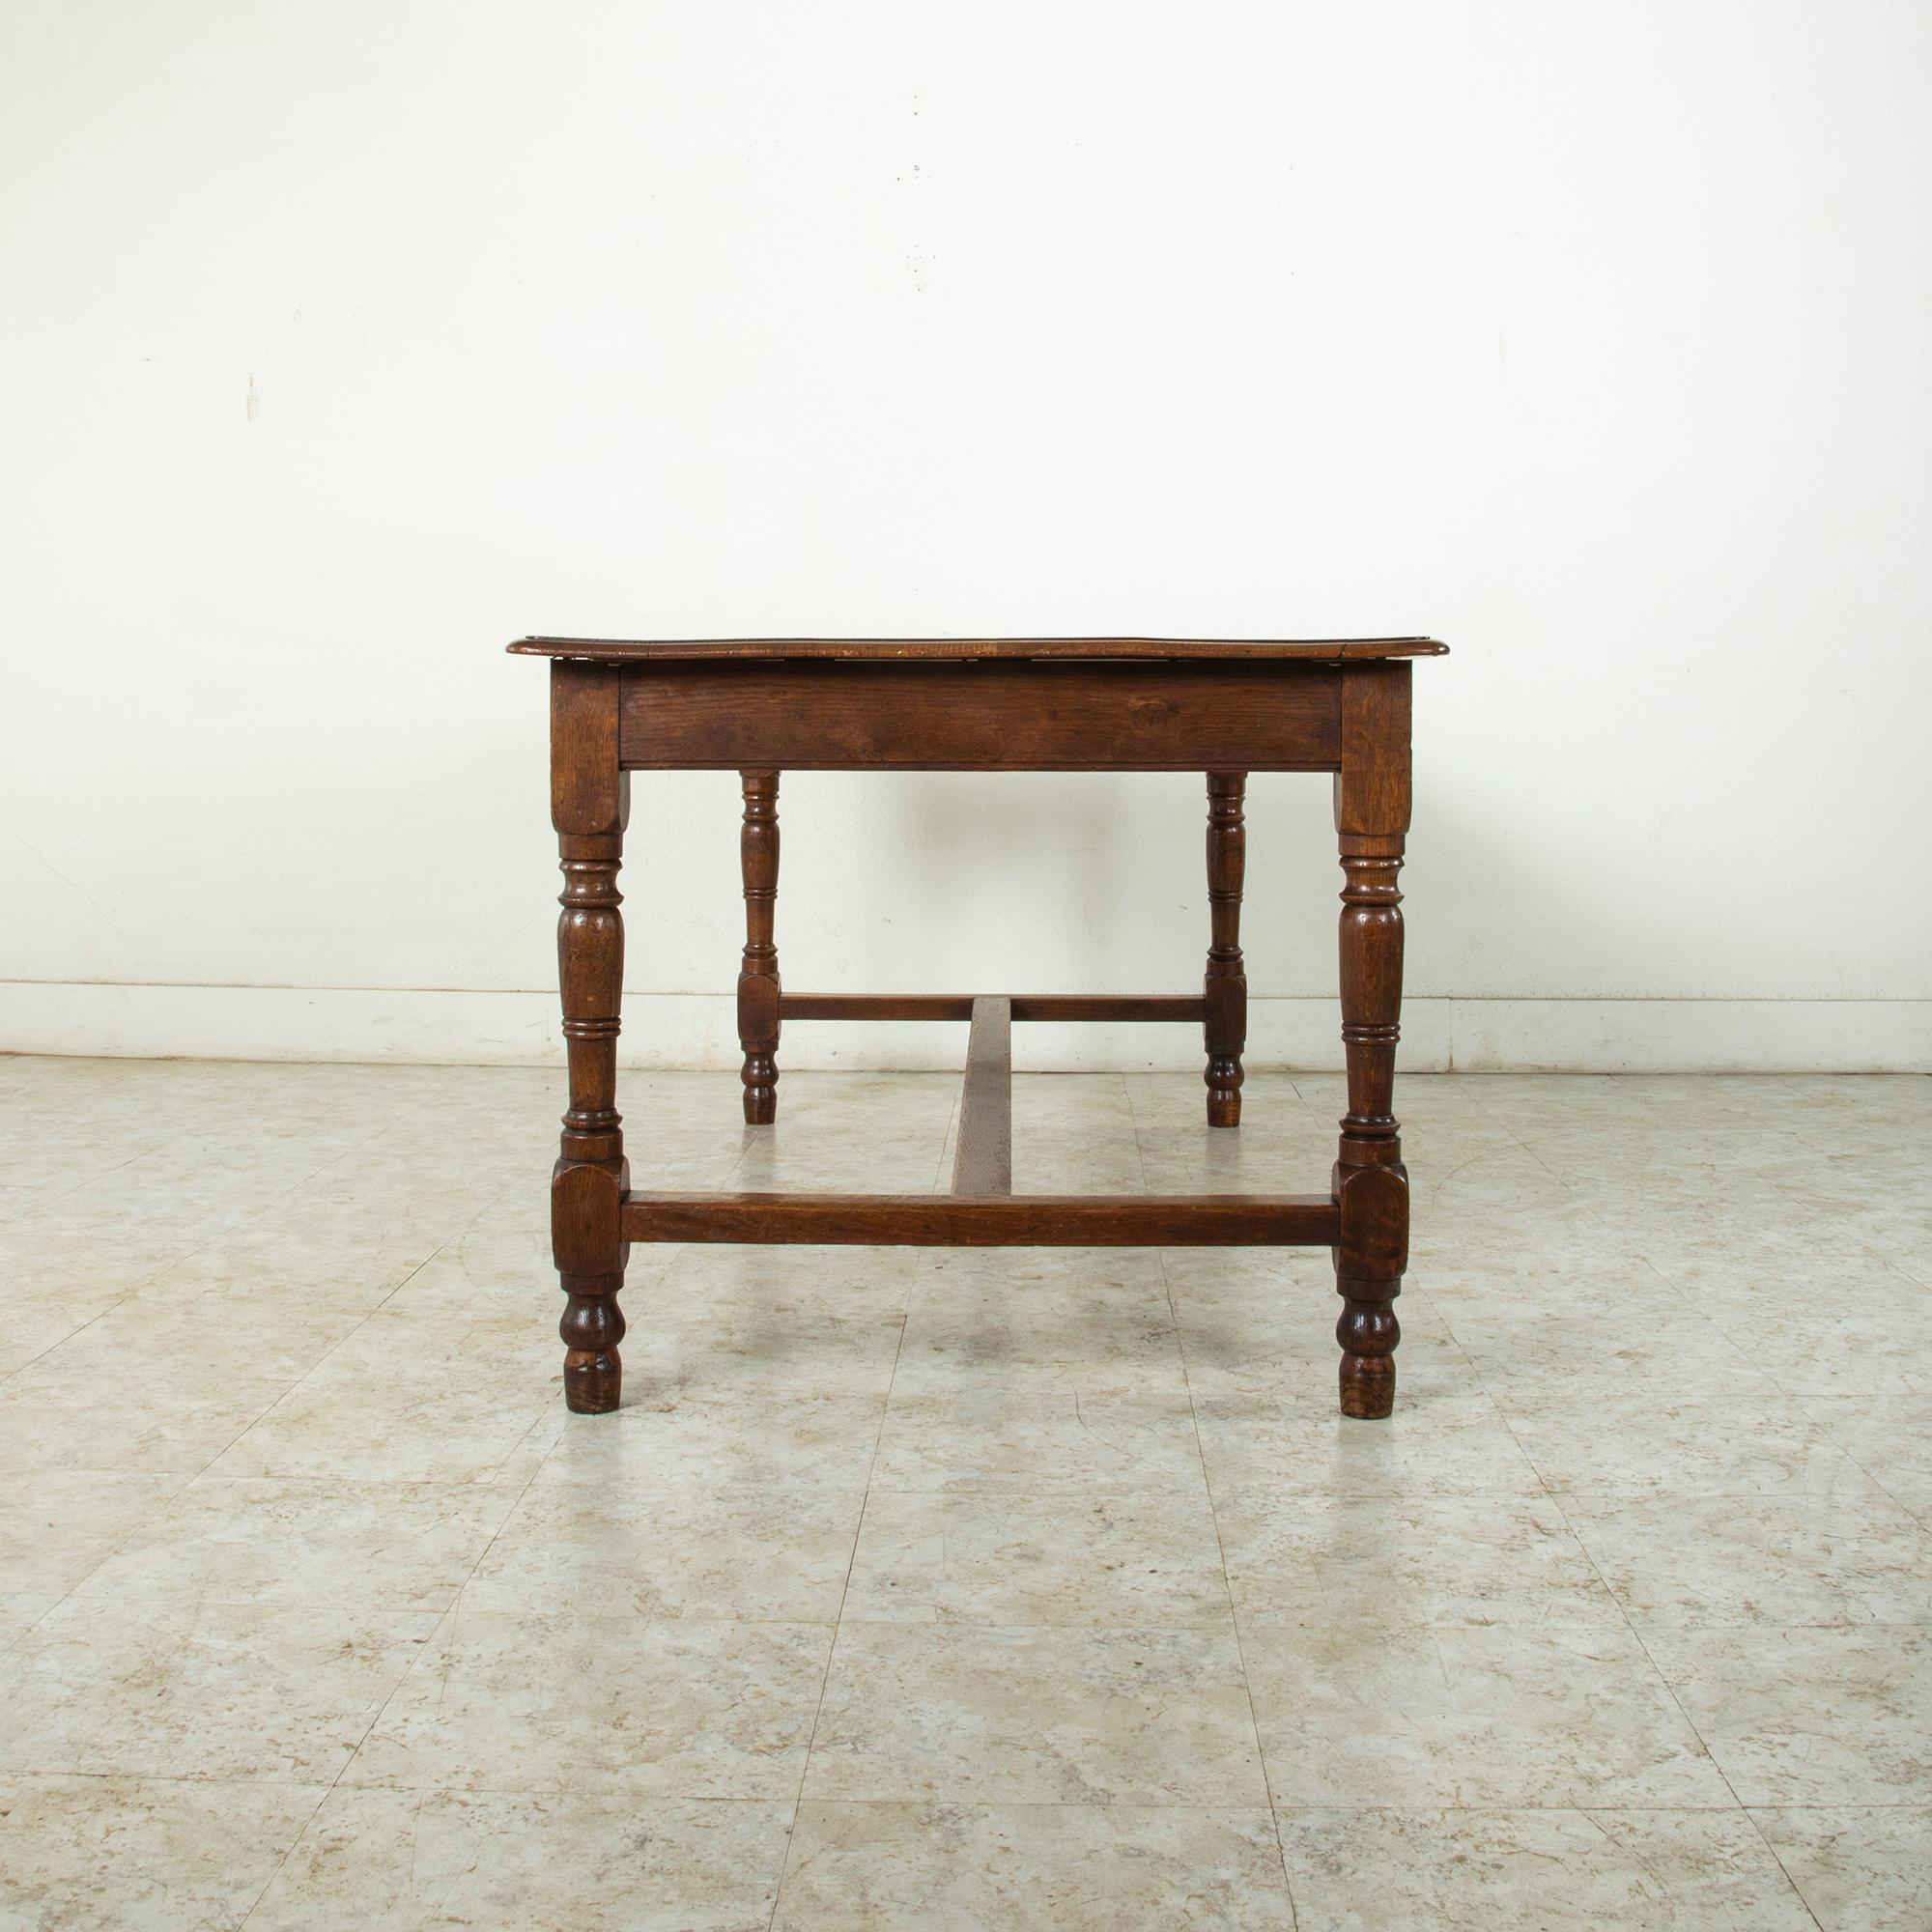 Rustic French Artisan Made Oak Farm Table or Dining Table, circa 1900